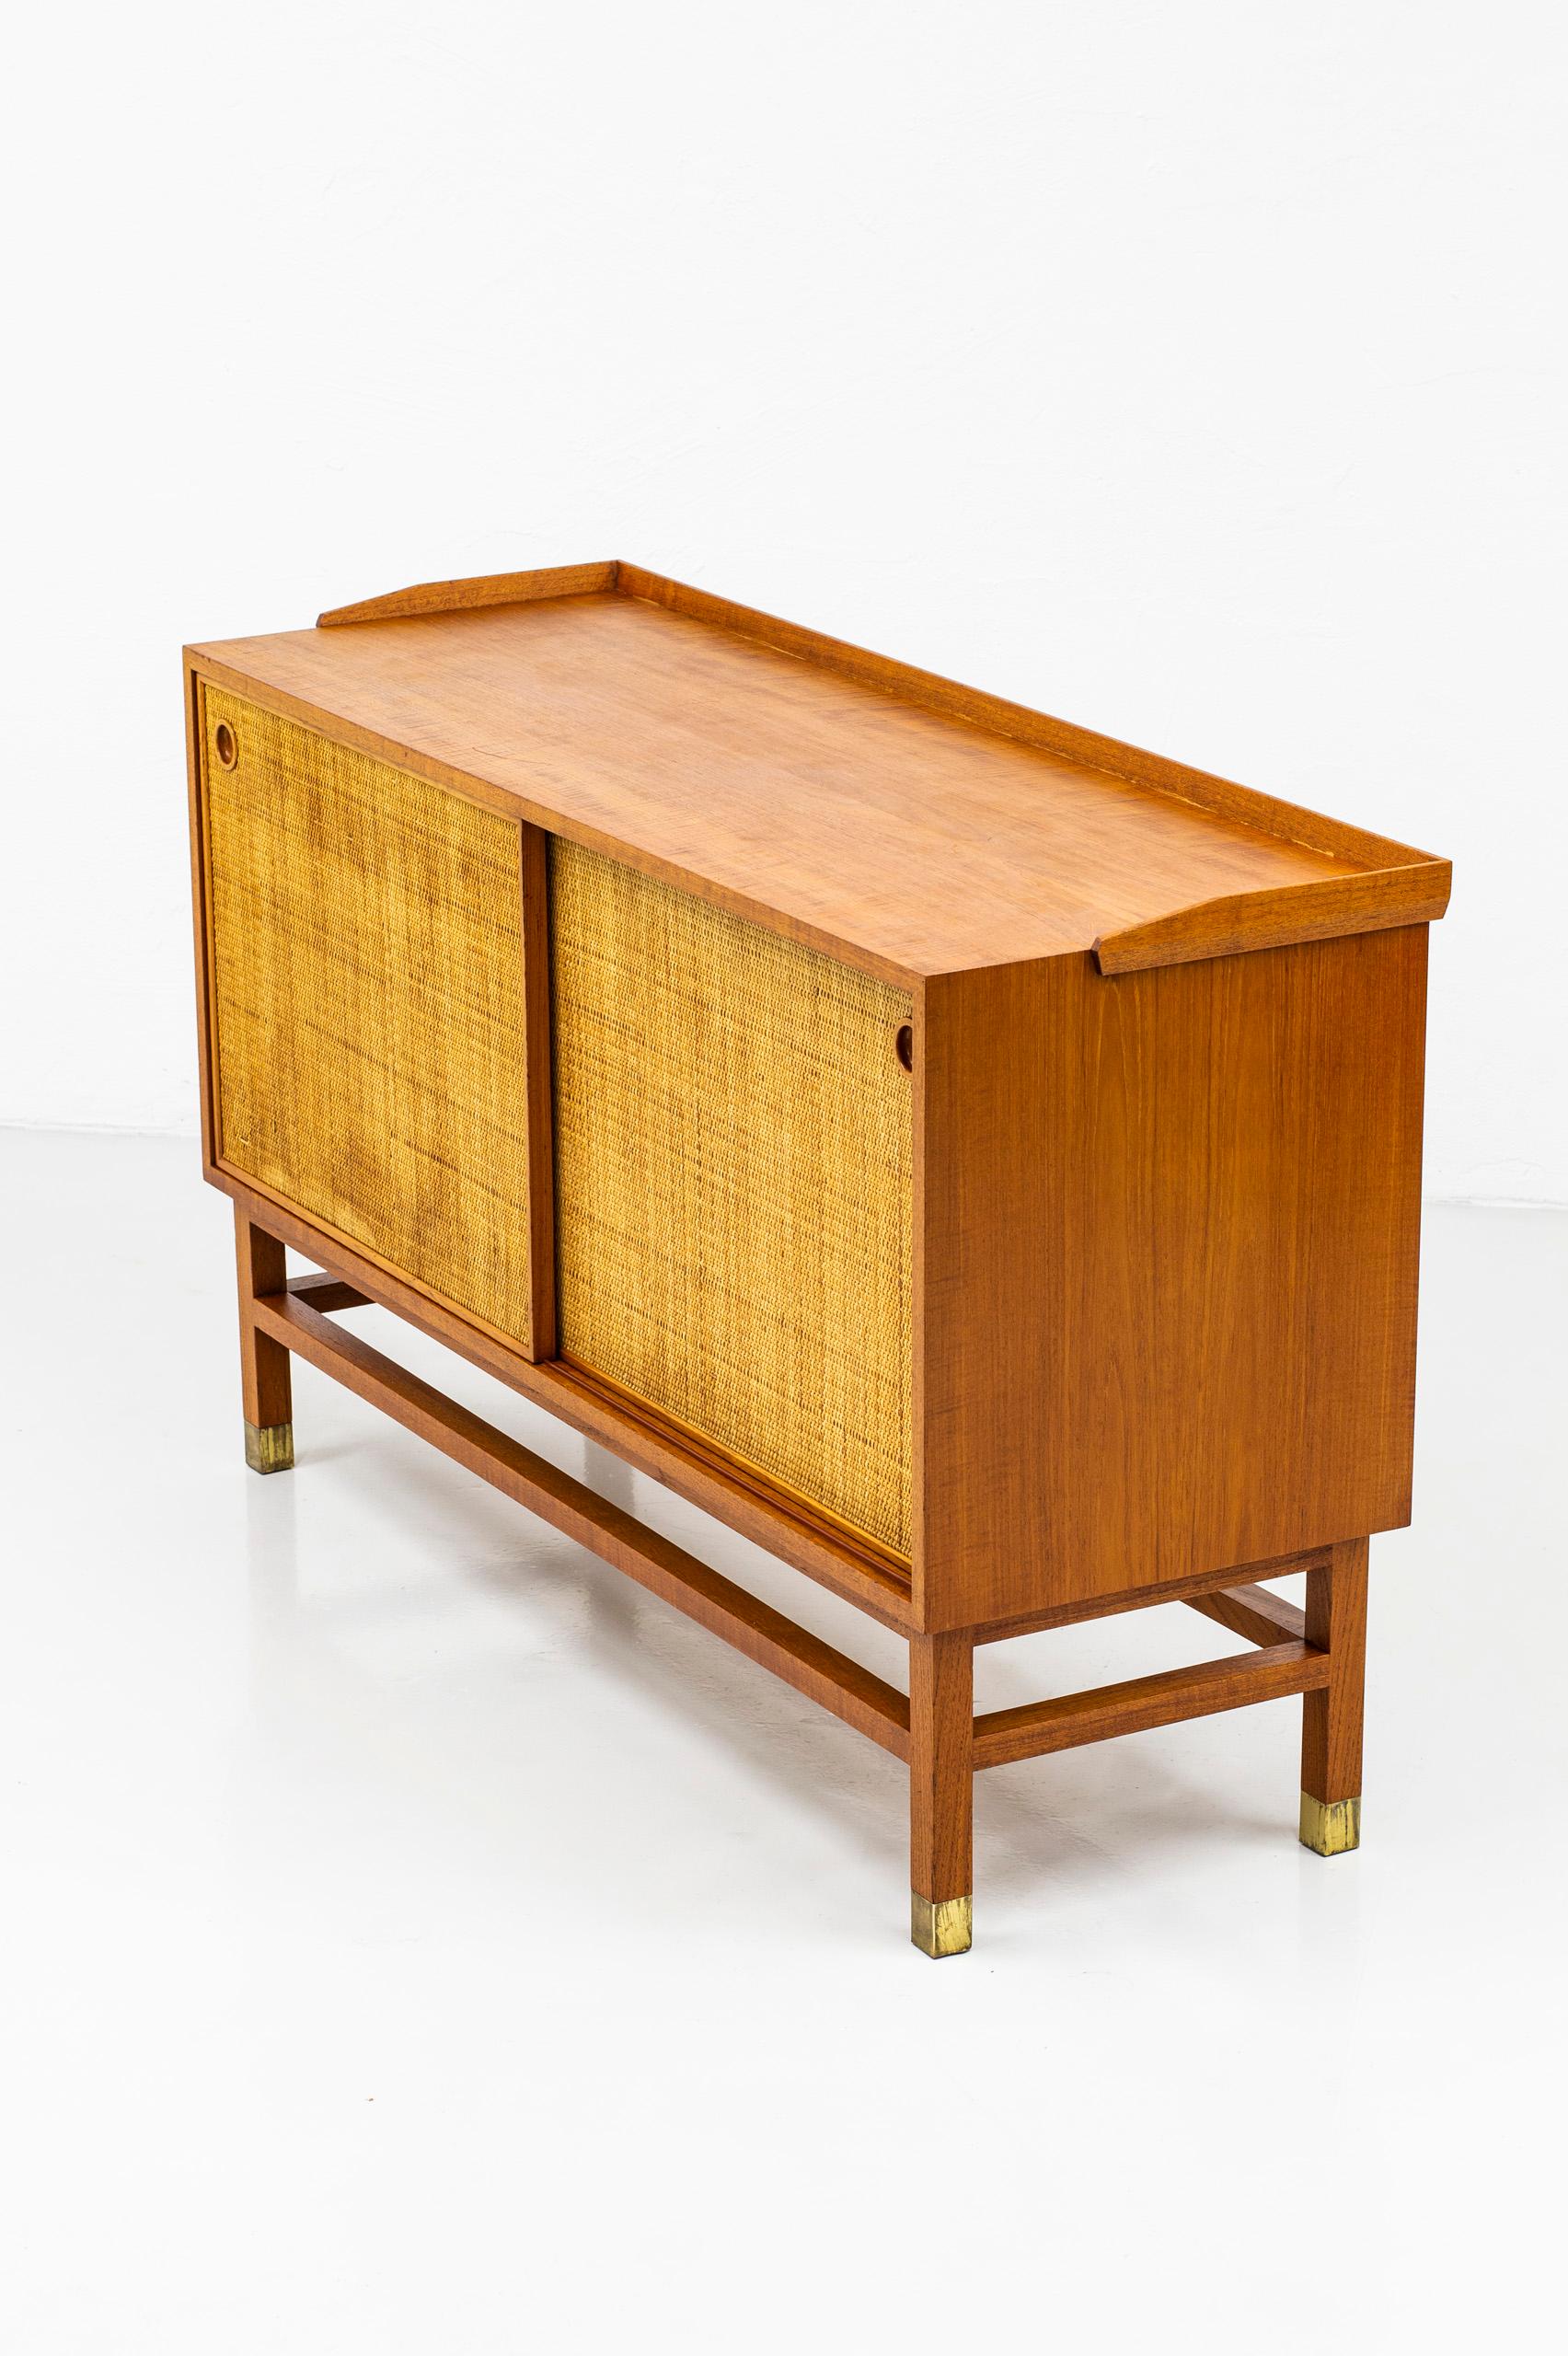 Sideboard produced in Sweden during the 1950s. Made from teak with contrasting rattan doors, ash wood on the inside and brass details on the legs. Adjustable and optional shelves on the inside. Very nice quality with teak veneer on the backside